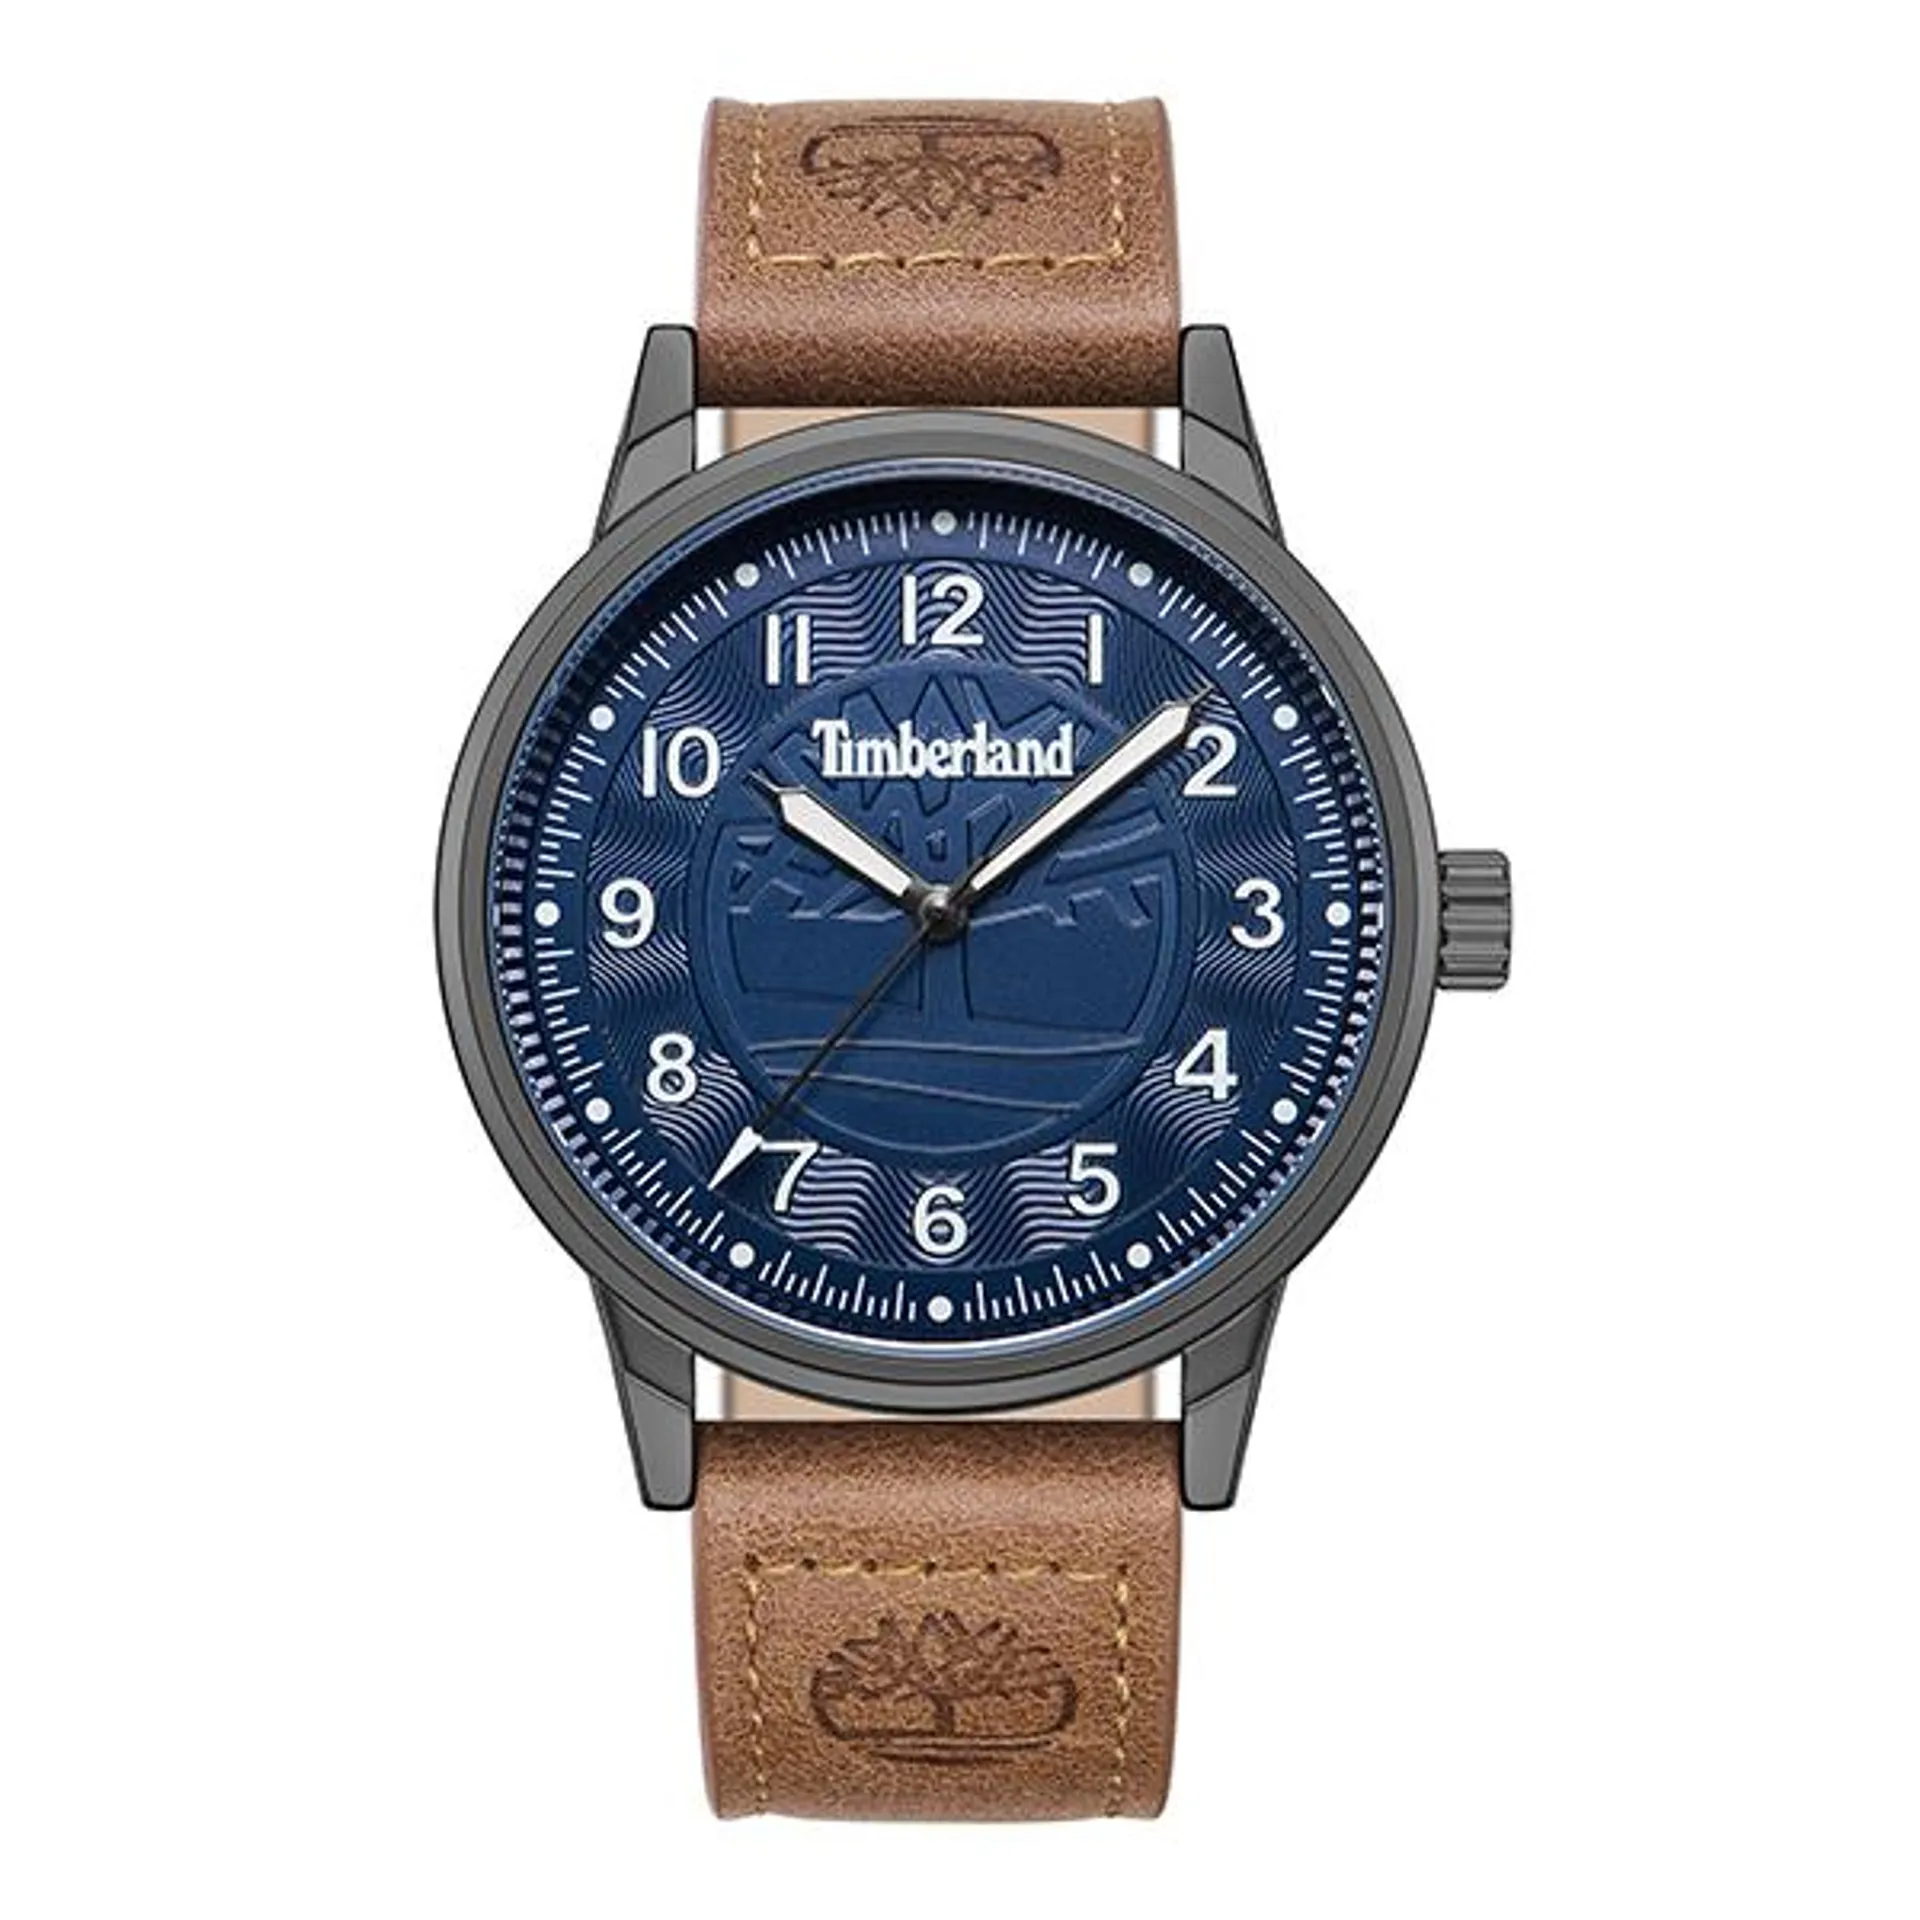 Timberland Gents Newfane Watch with Genuine Leather Strap